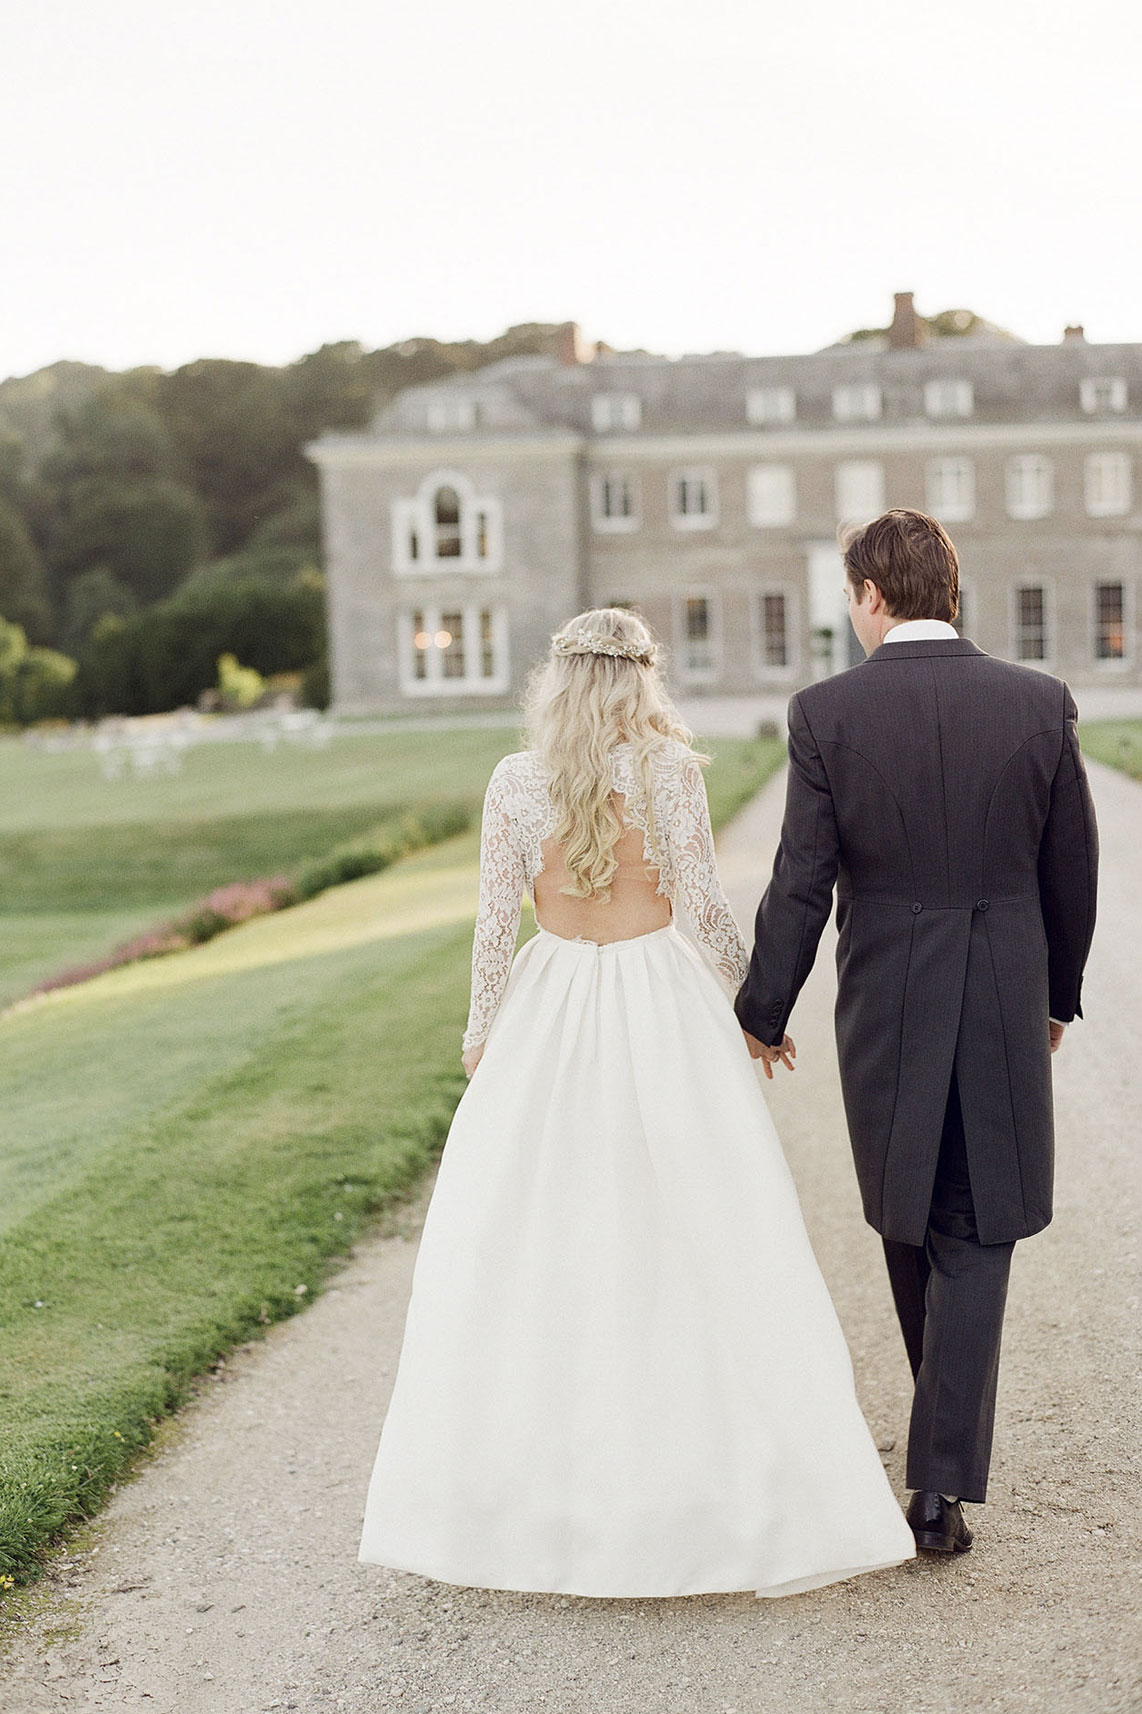 Picture of Sarah and Mark at their wedding in Cornwall, which was planned by Jenny Wren - Wedding Planner in Cornwall